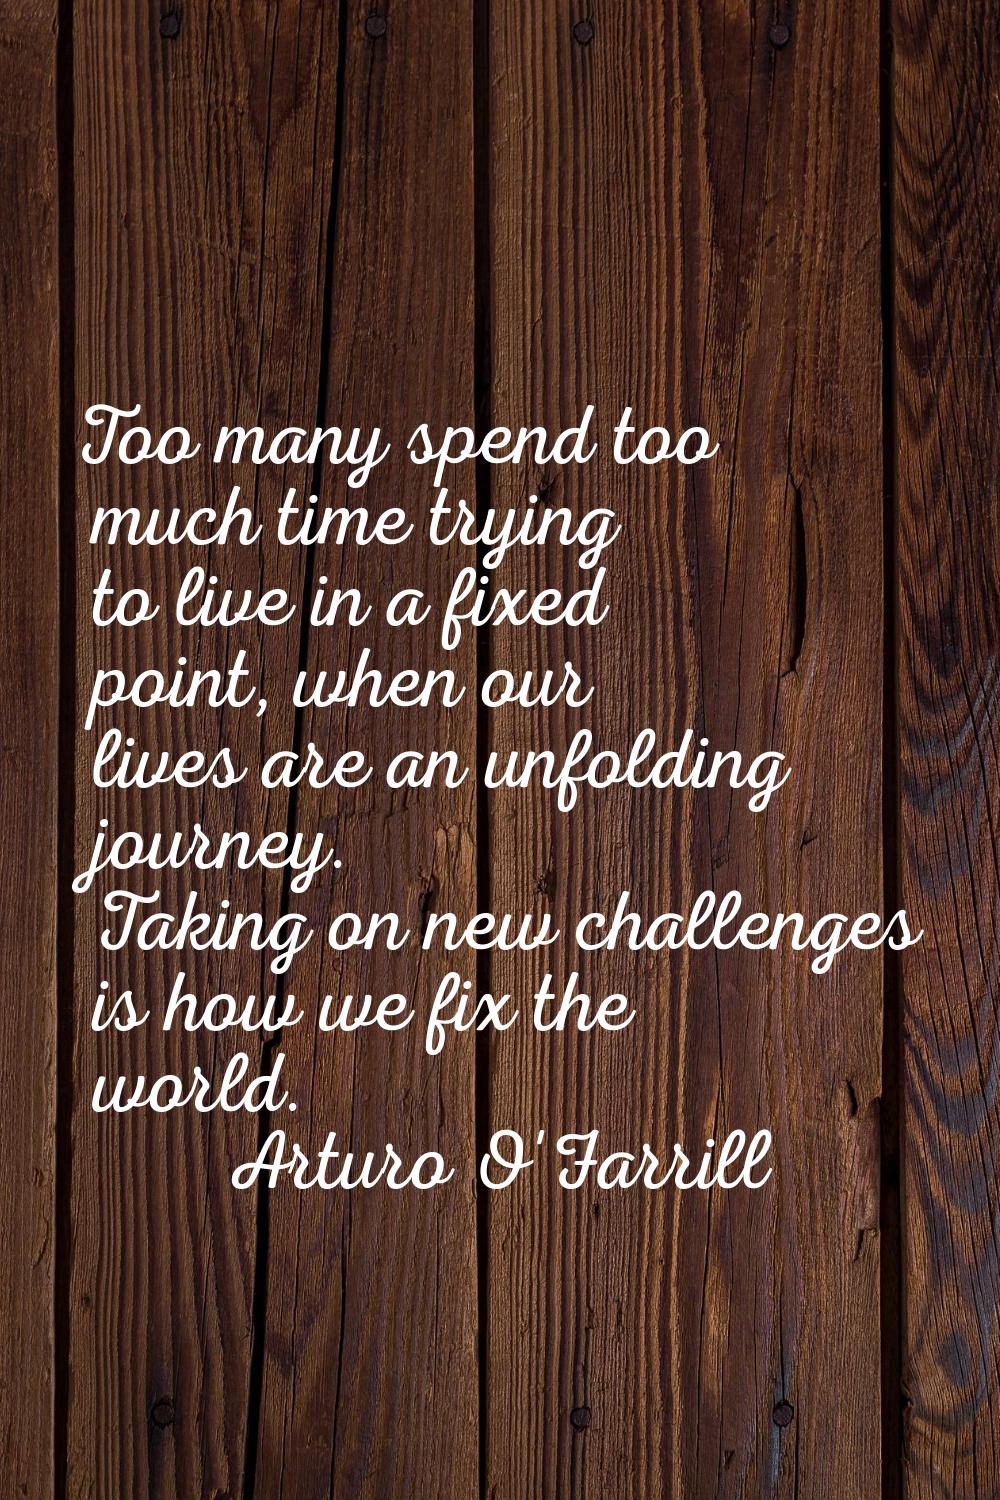 Too many spend too much time trying to live in a fixed point, when our lives are an unfolding journ